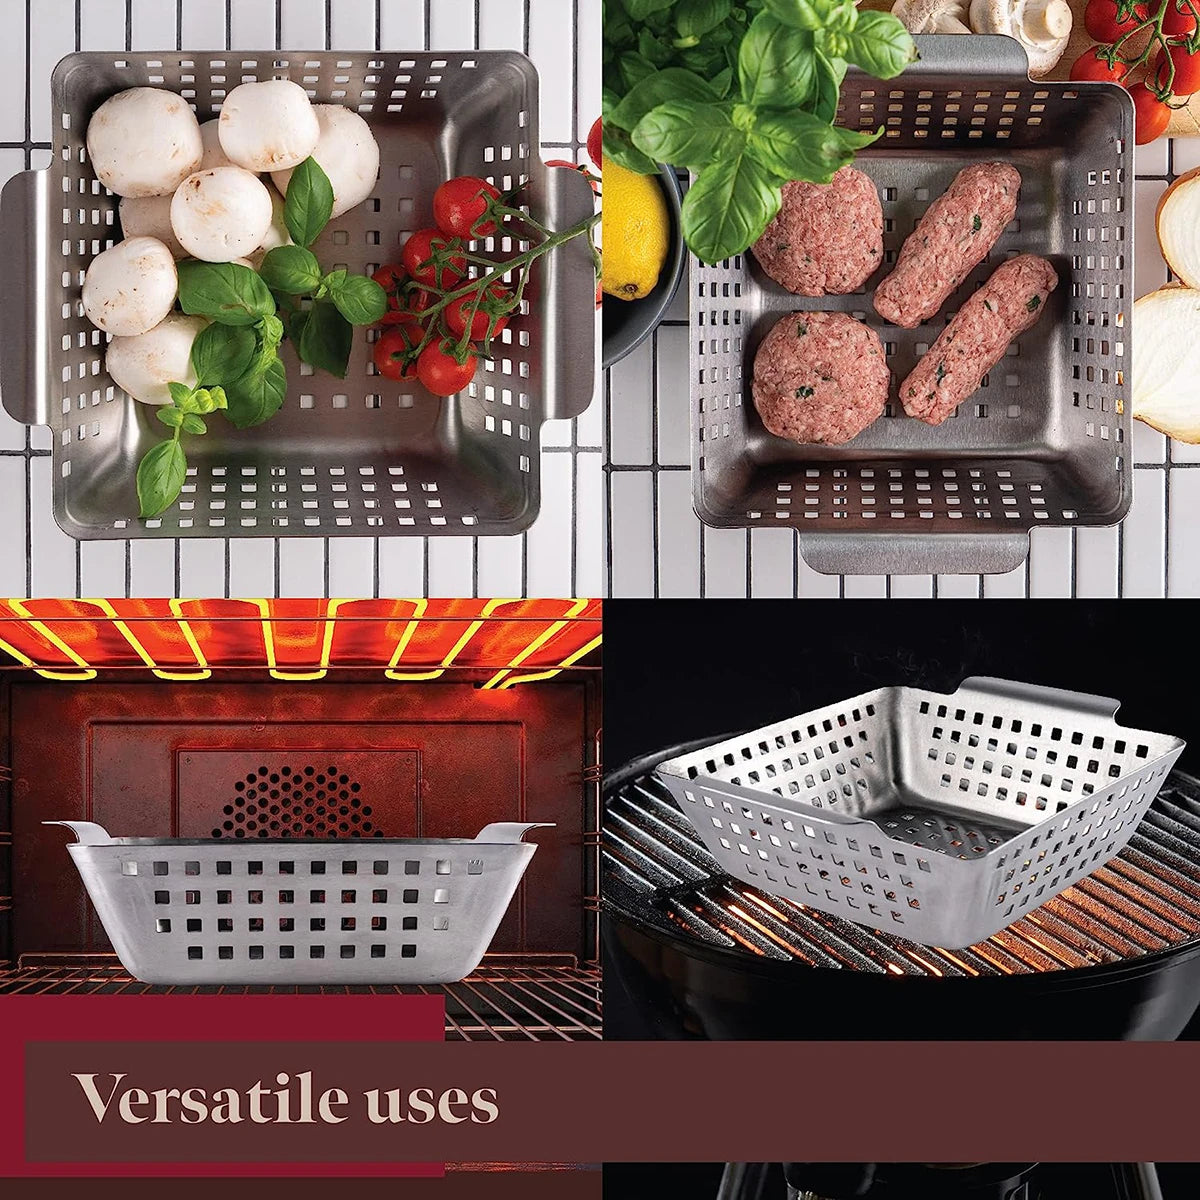 BBQ Grilling Basket Barbecue Stainless Steel Plate Cooking Veggies Seafood Meats Gadgets Tray Tools Home Kitchen Supplies